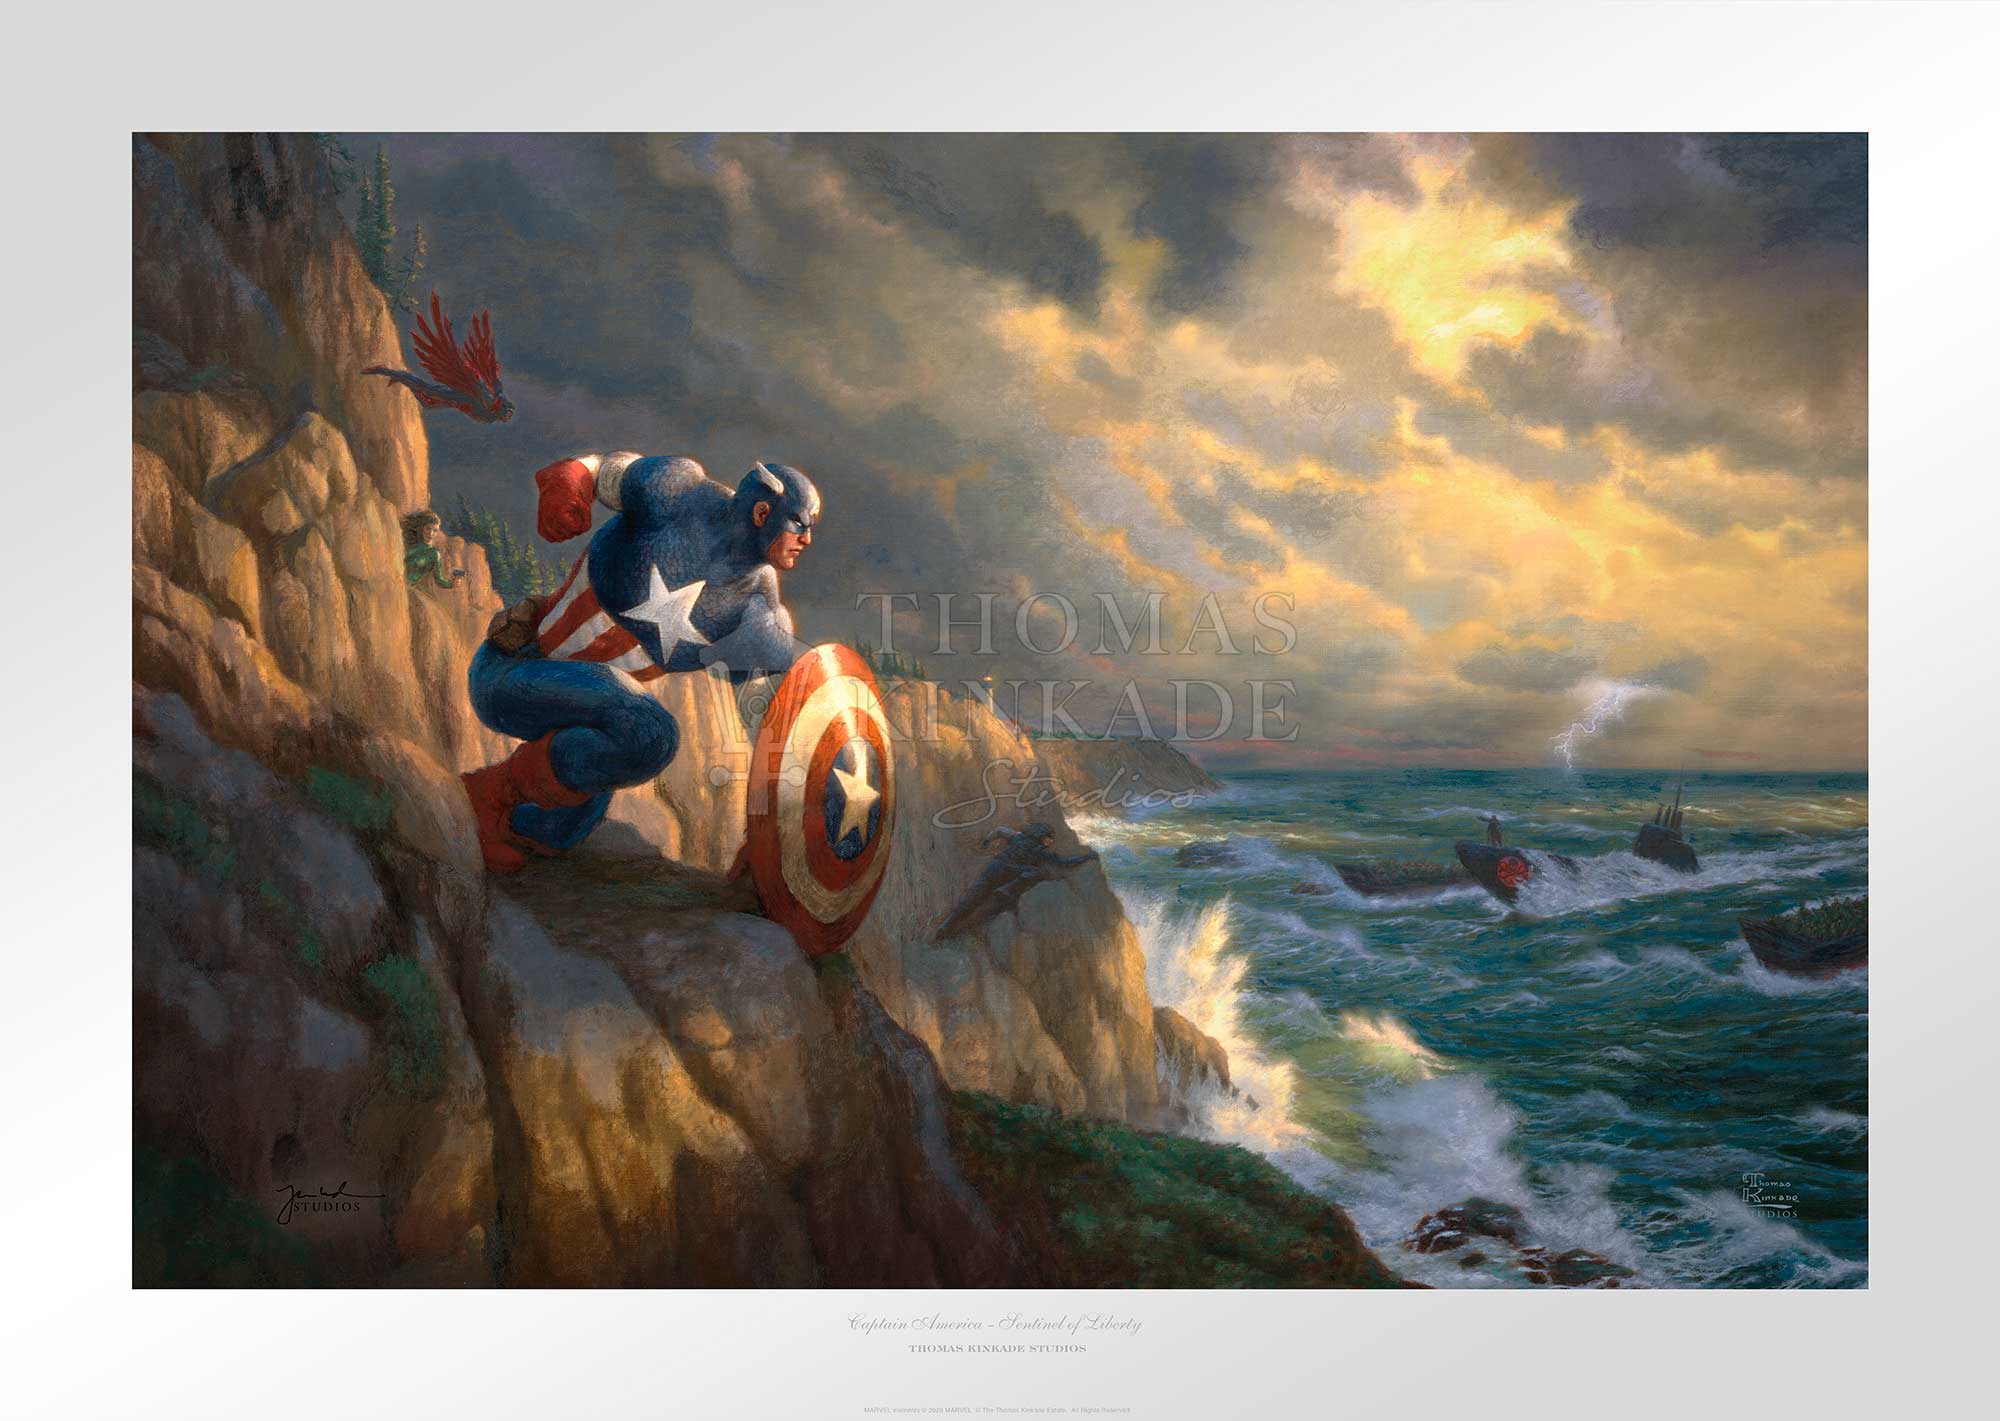 Captain America has positioned himself ready to battle Red Skull and his Hydra henchmen, who are approaching the coast in submarines.  Unframed Paper